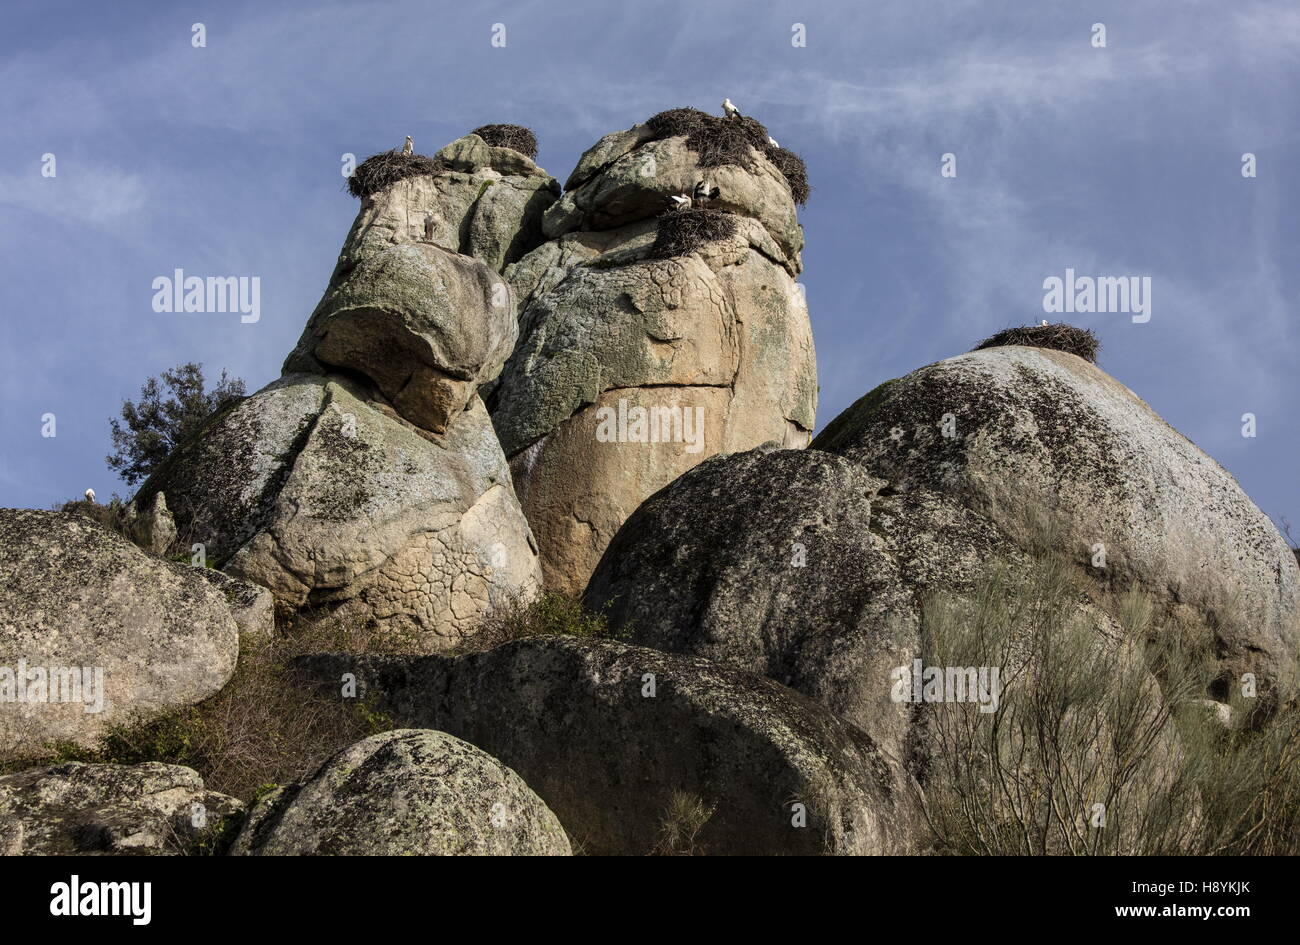 White Stork nests on granite boulders at Los Barruecos Natural Monument, Extremadura, West Spain. Stock Photo